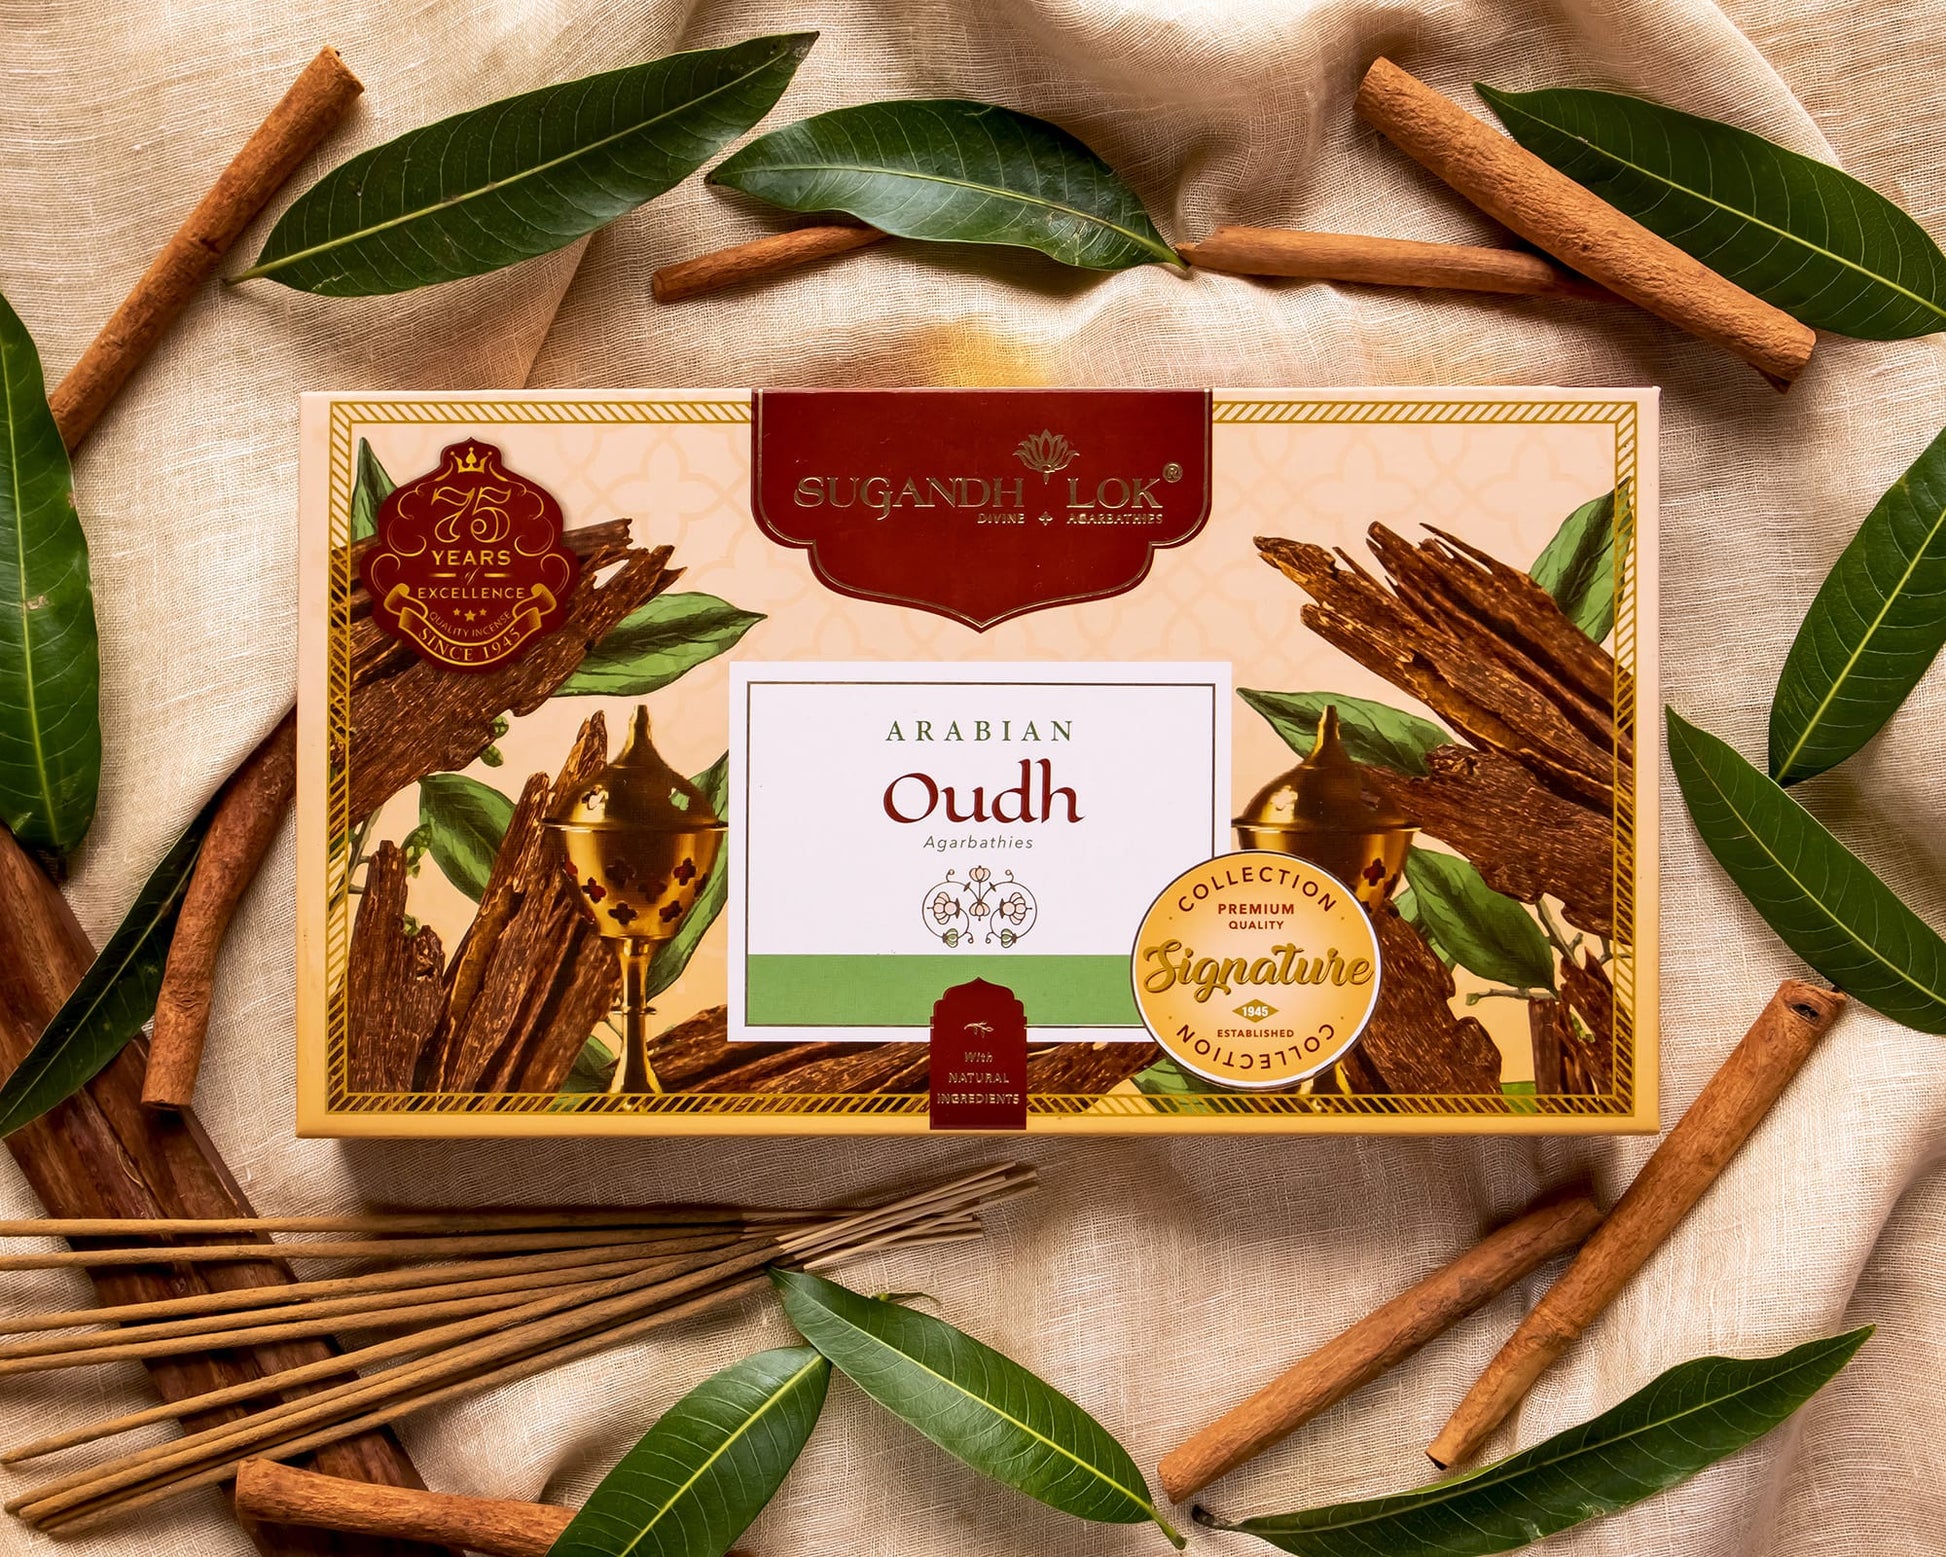 Arabian Oudh Agarbatti Box surrounded by oudh and leaves